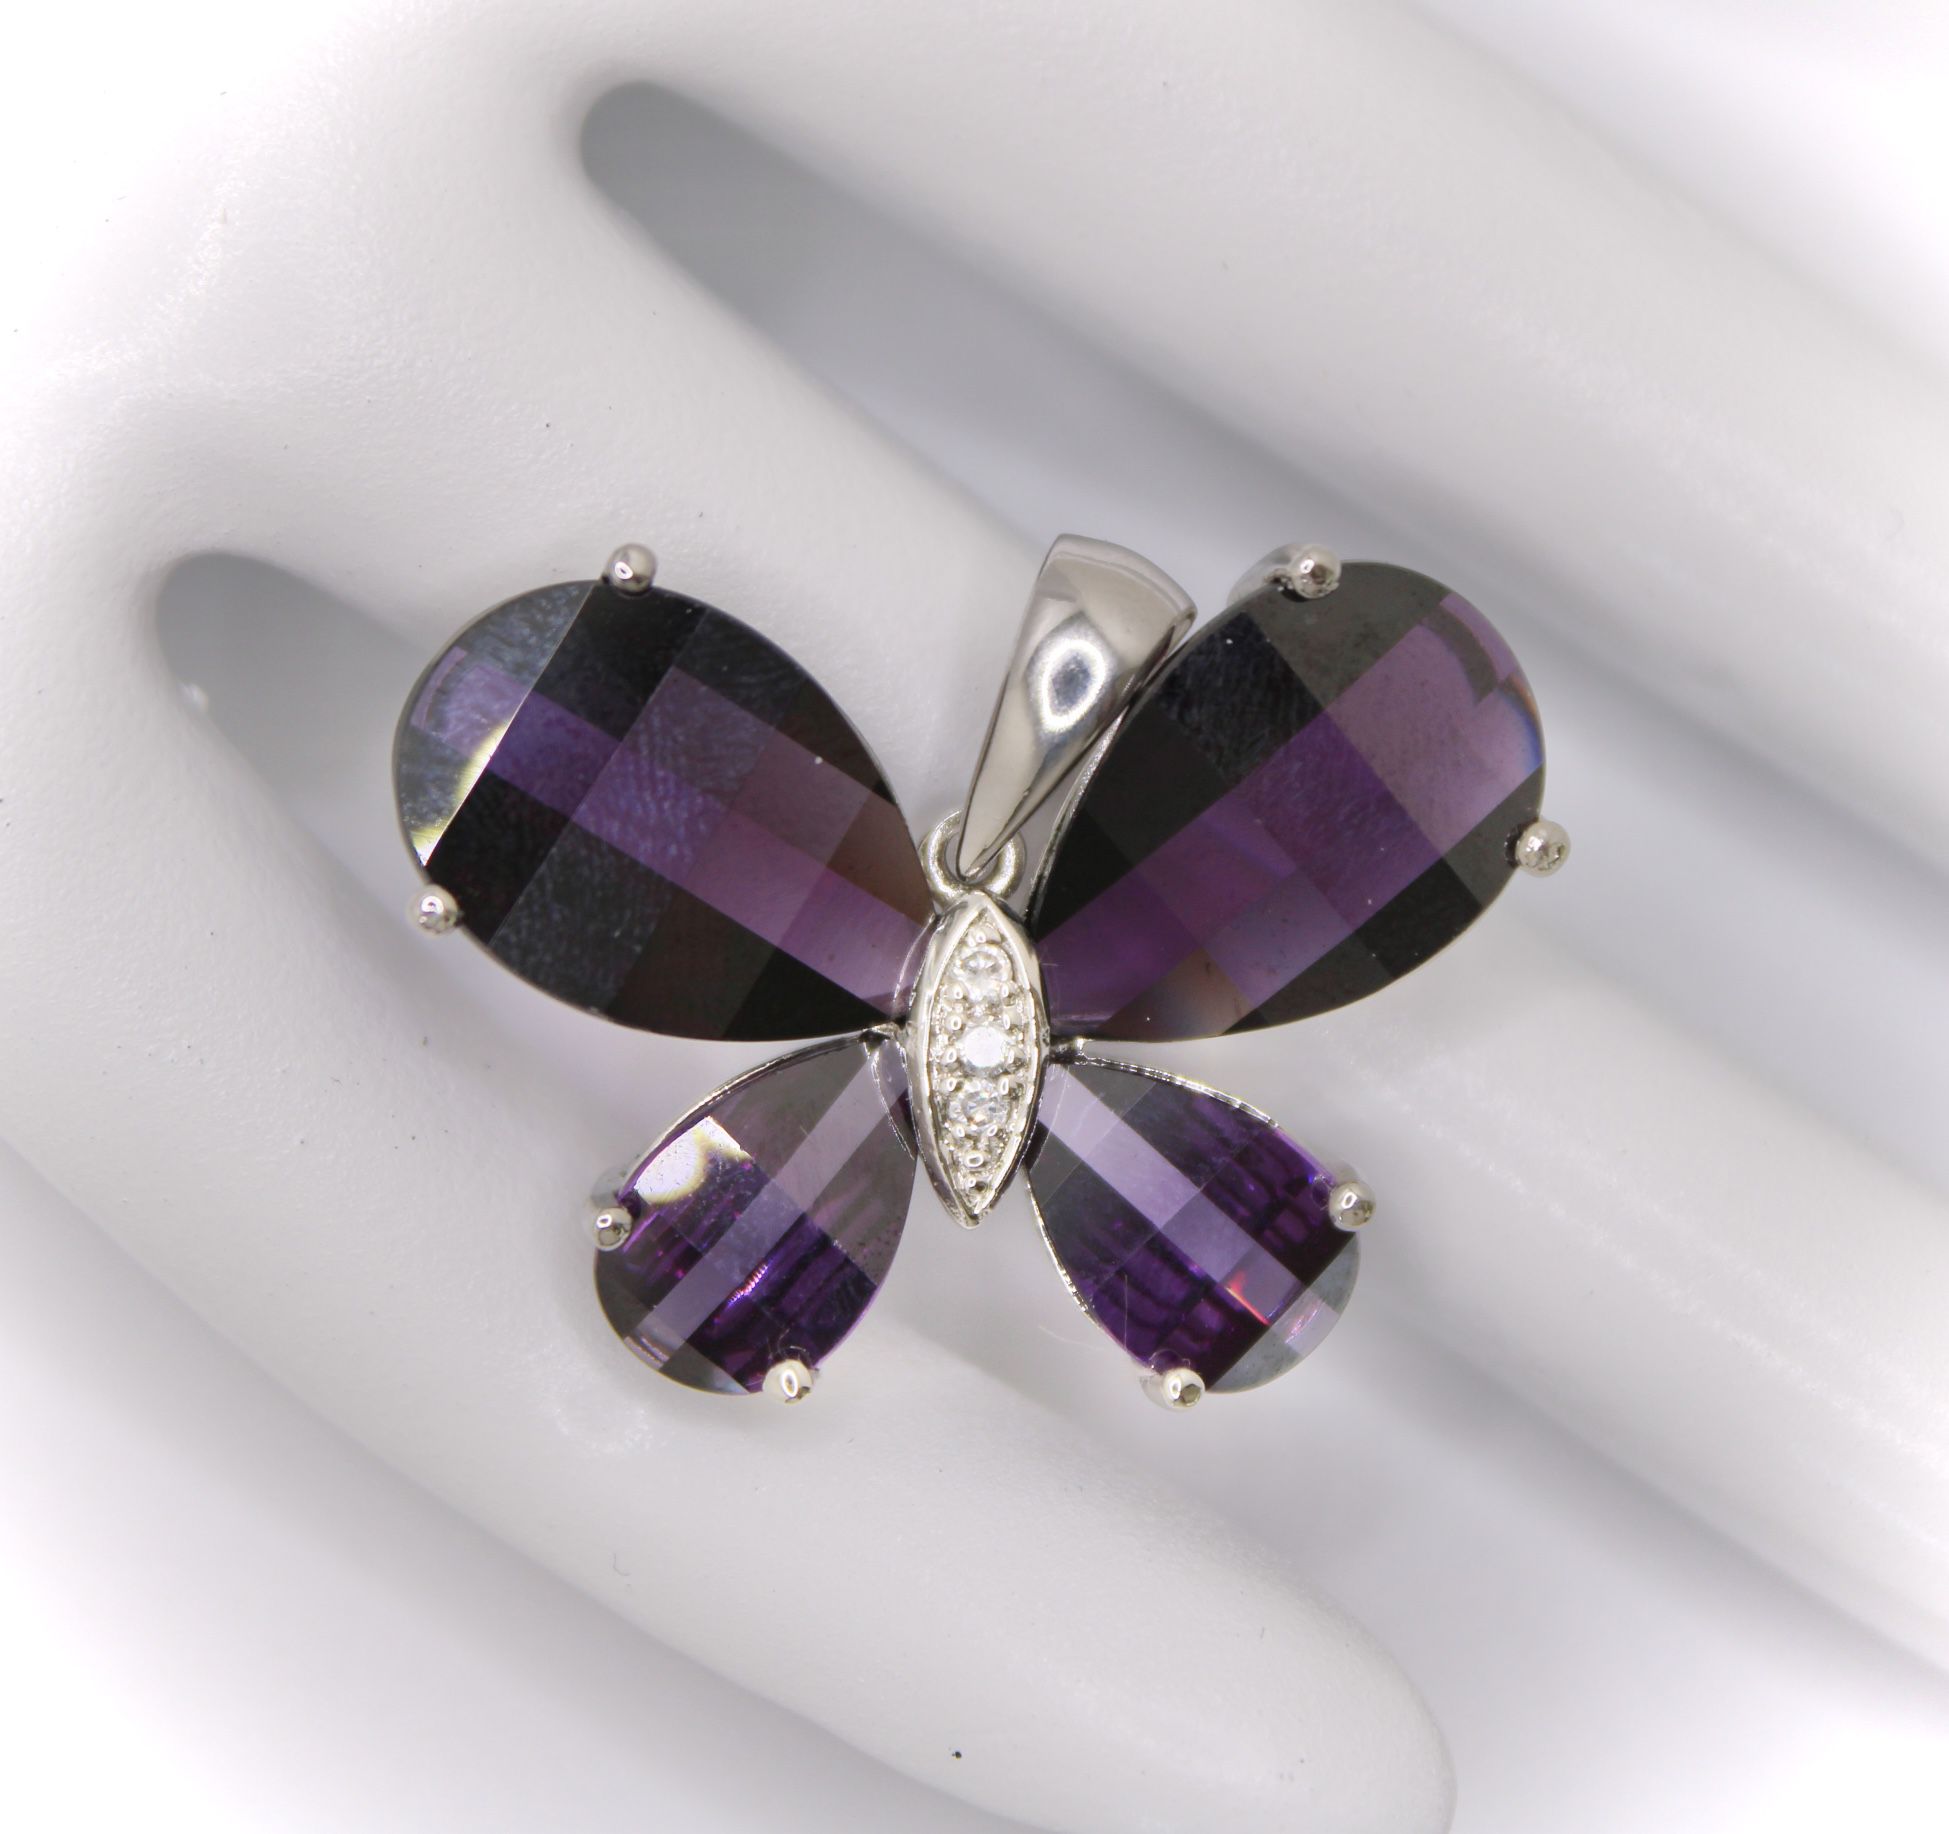 Sterling Silver Amethyst and Cubic Zirconia Butterfly Pendant 1 5/16” W by 15/16” H, 11.96 Grams